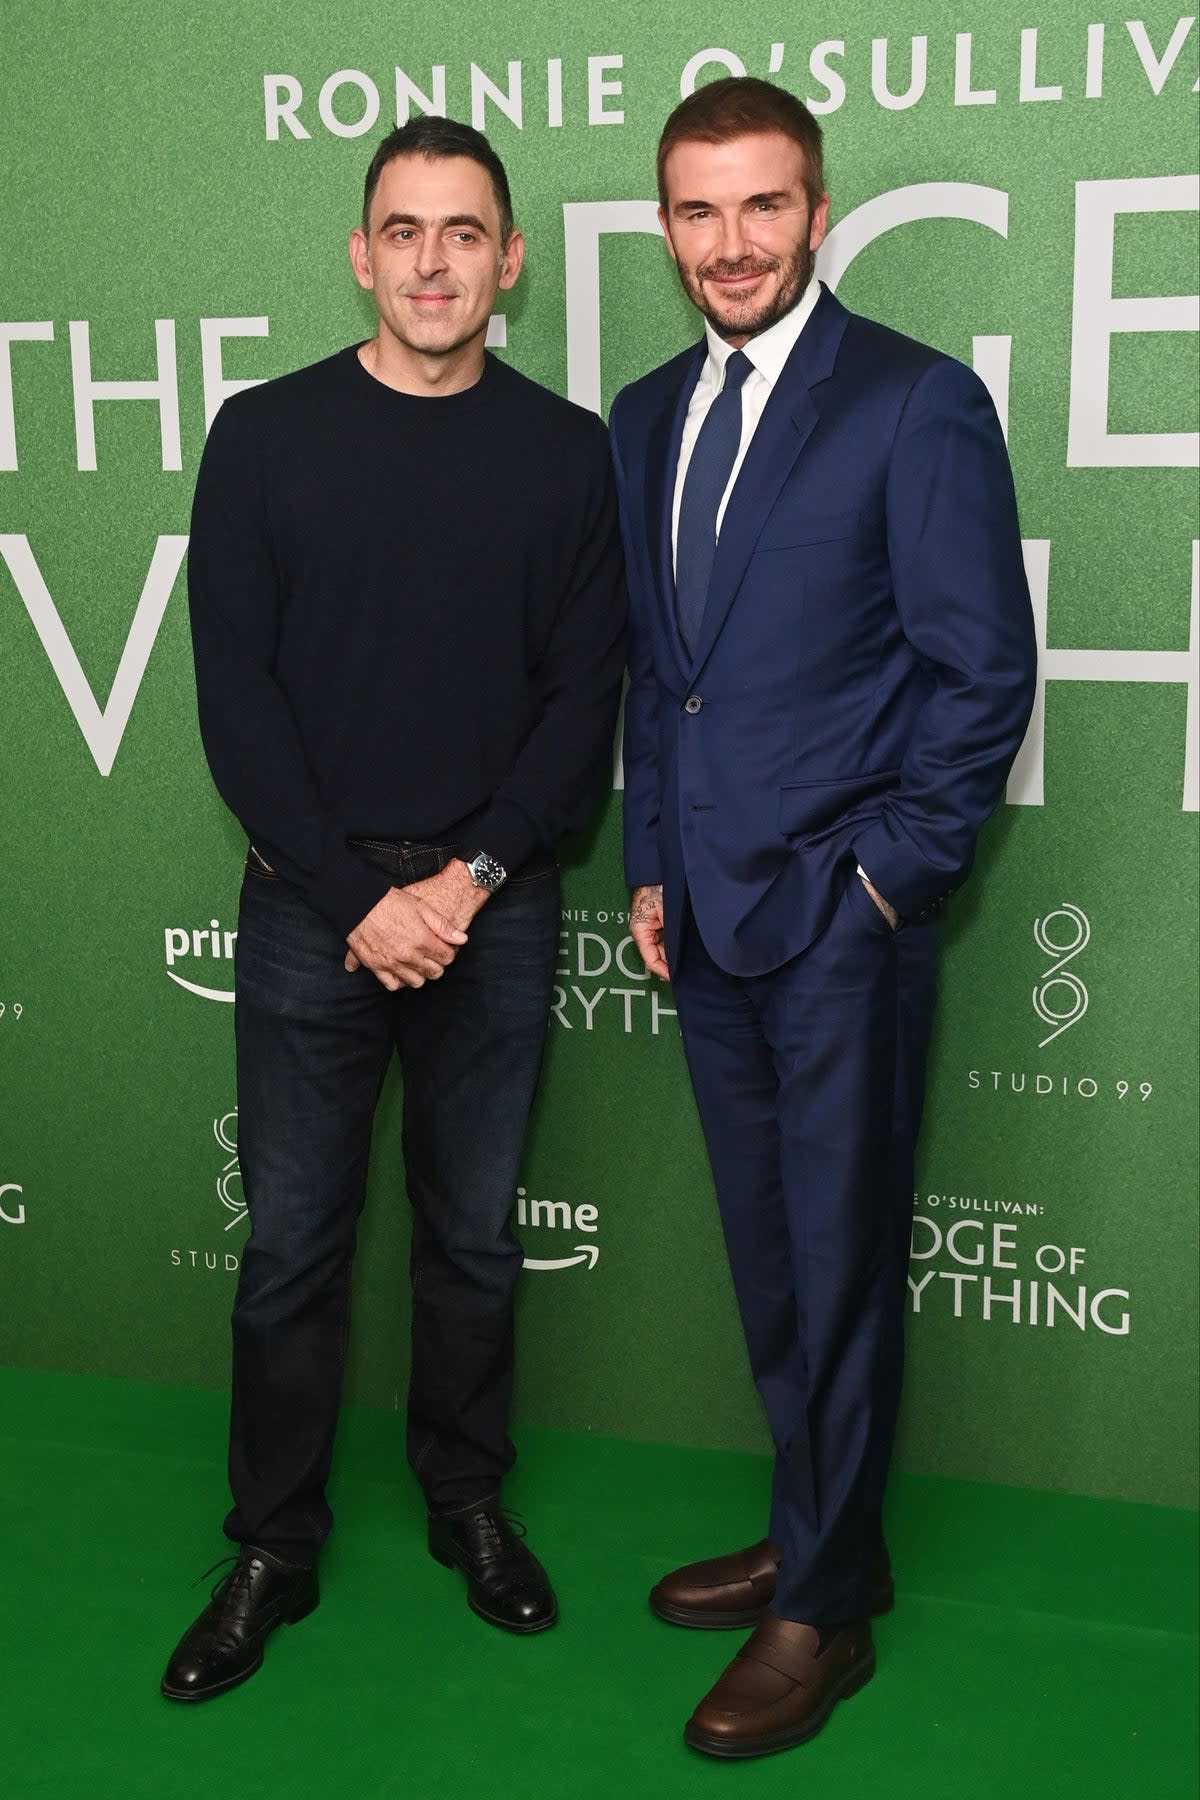 Ronnie O'Sullivan and David Beckham attend the UK Premiere of Ronnie O'Sullivan: The Edge Of Everything at Odeon Luxe West End on Wednesday evening  (Dave Benett)